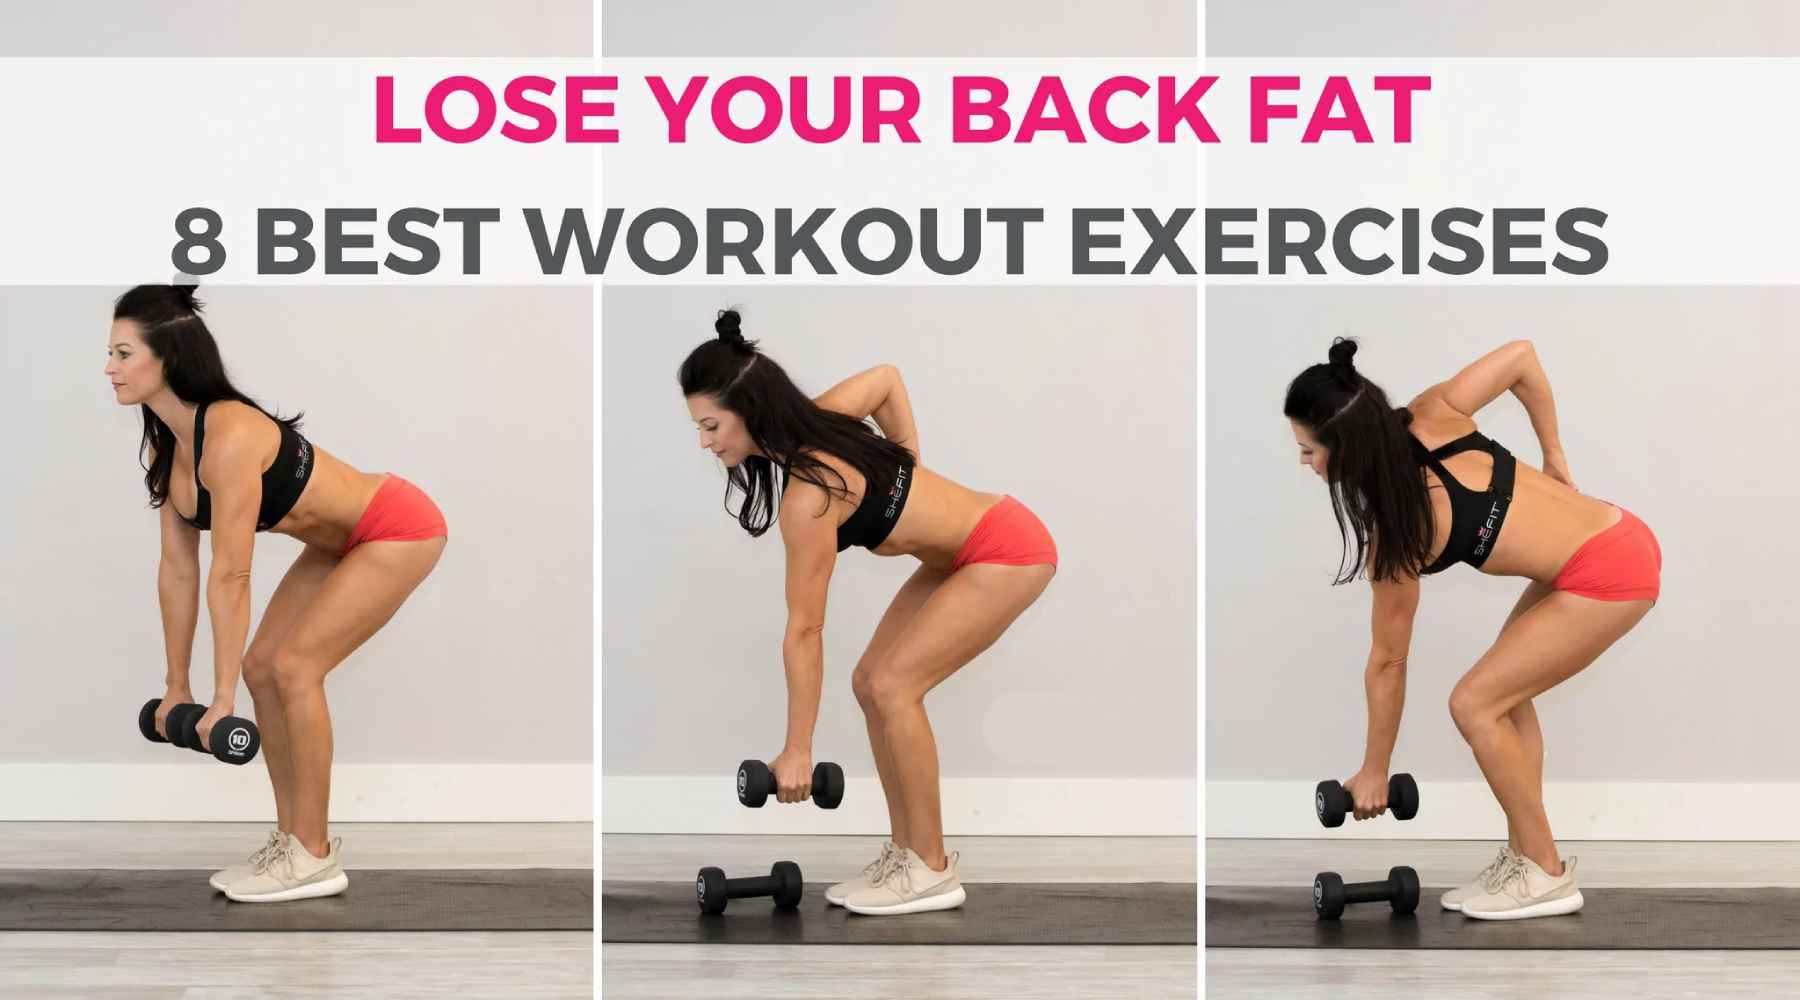 Back Exercises You Can Do at Home  Back exercises, Workout plan for women,  Exercise